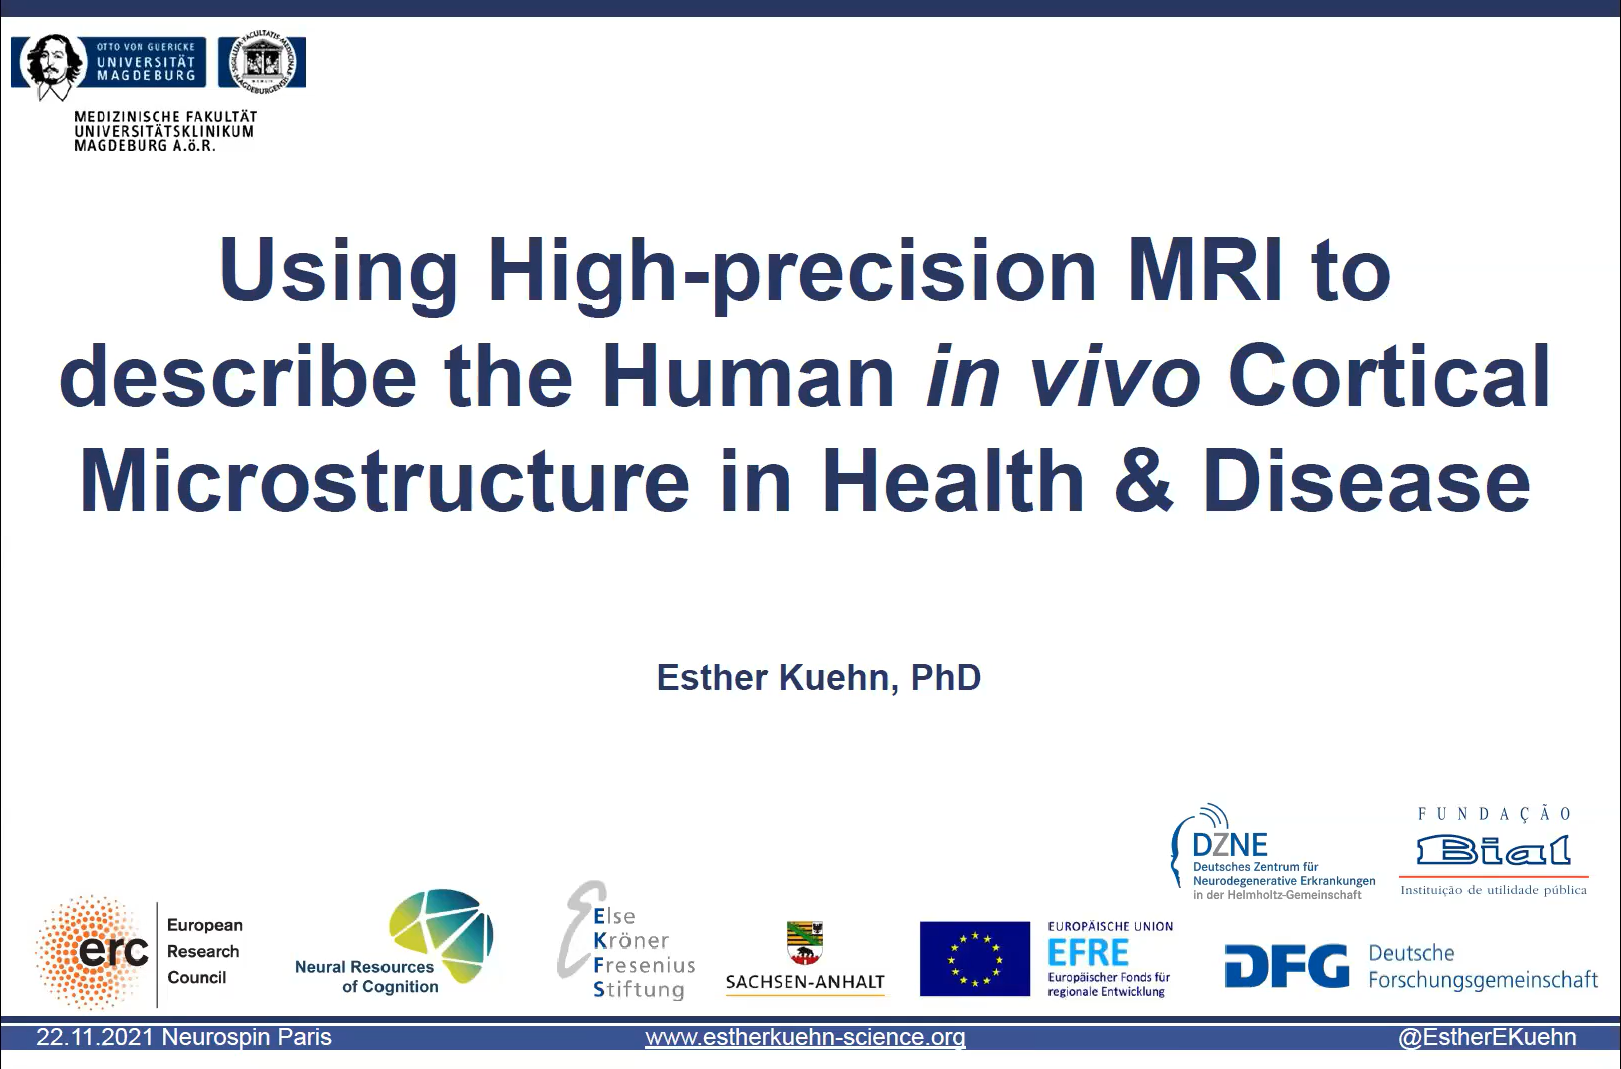 Using High-Precision MRI to describe the Human in vivo Cortical Microstructure in Health and Disease